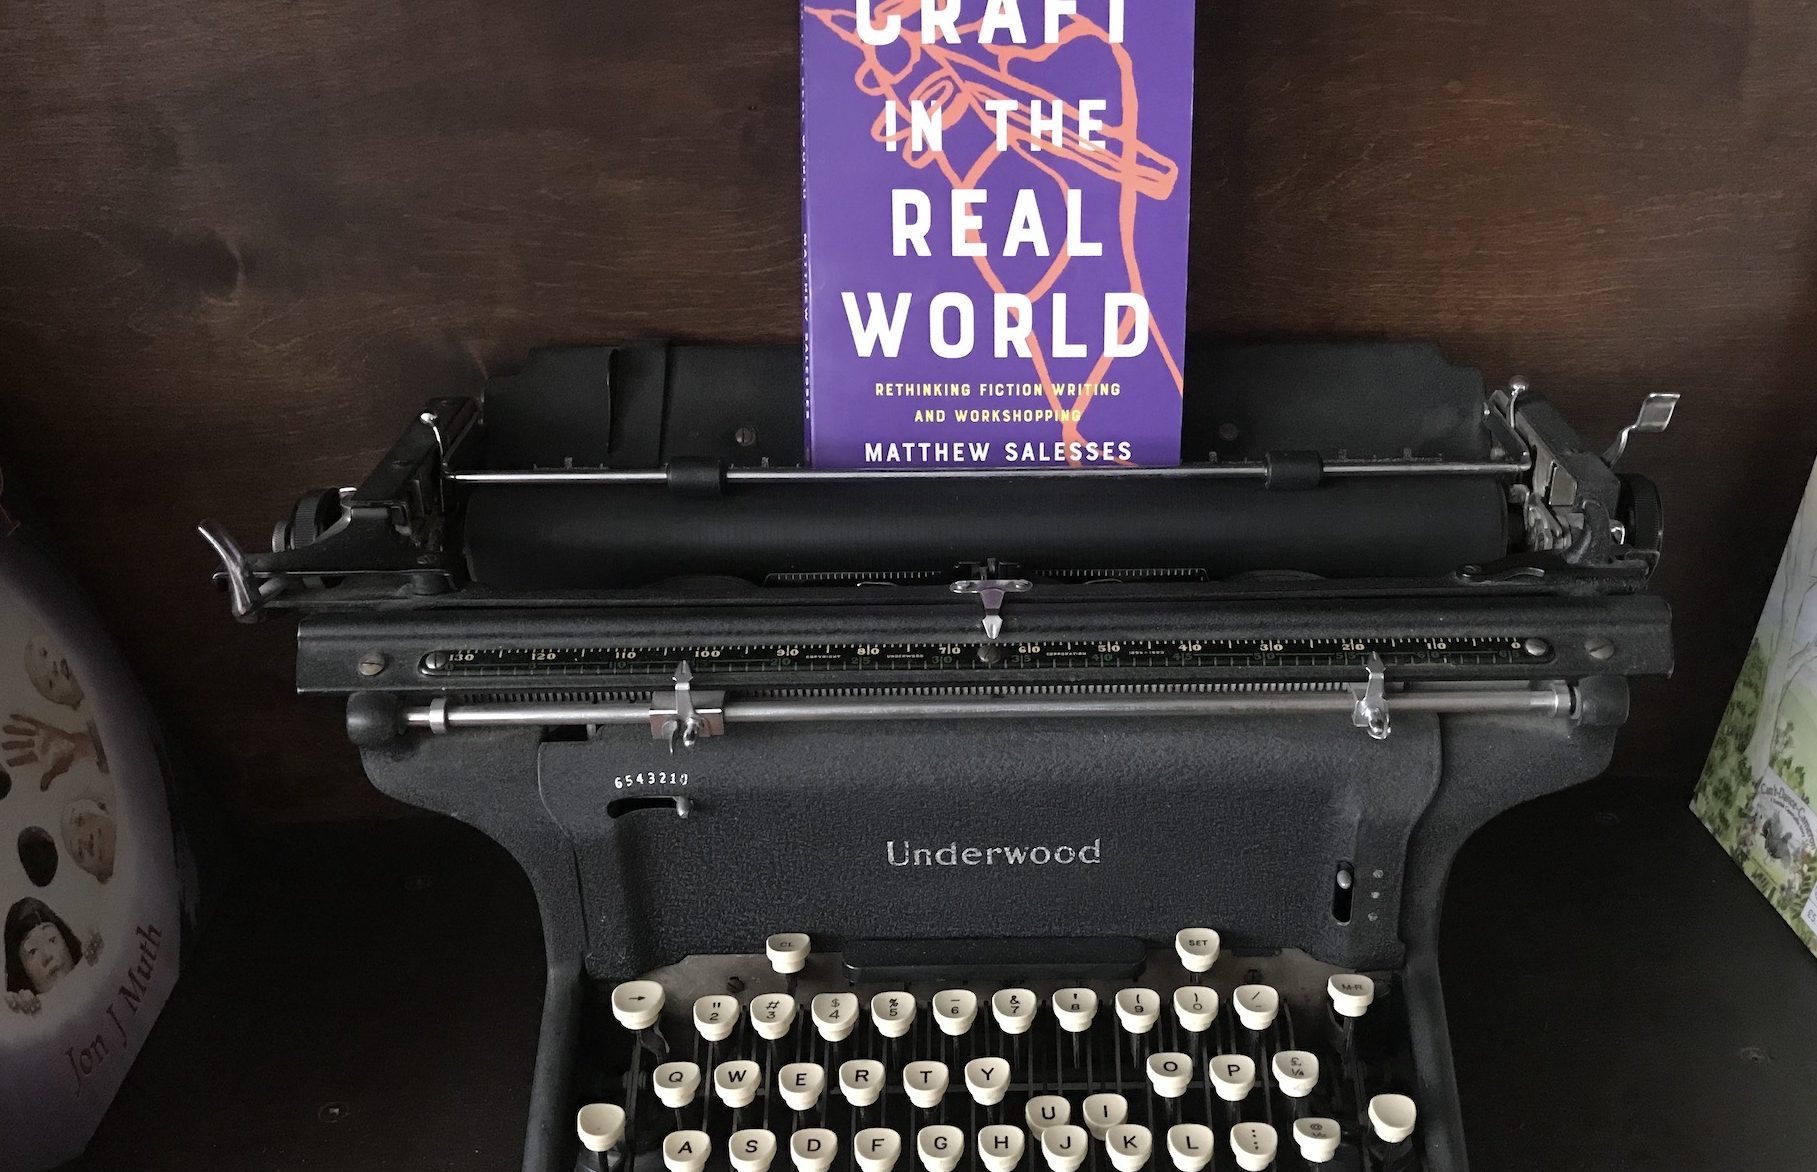 Craft in the Real World by Matthew Salesses